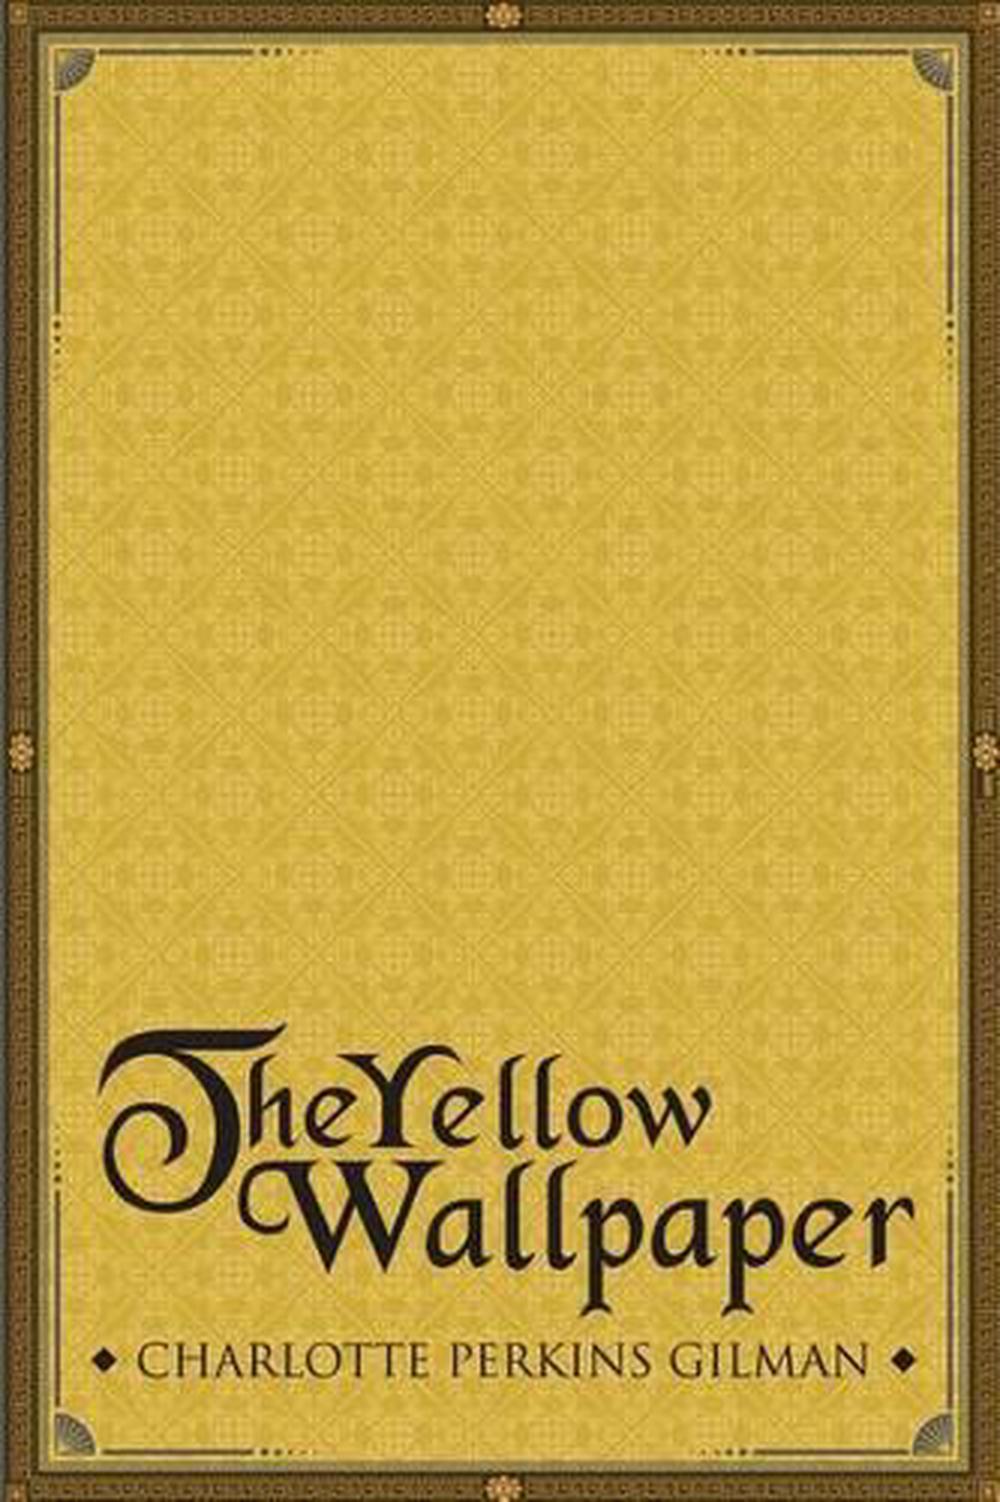 book review of yellow wallpaper